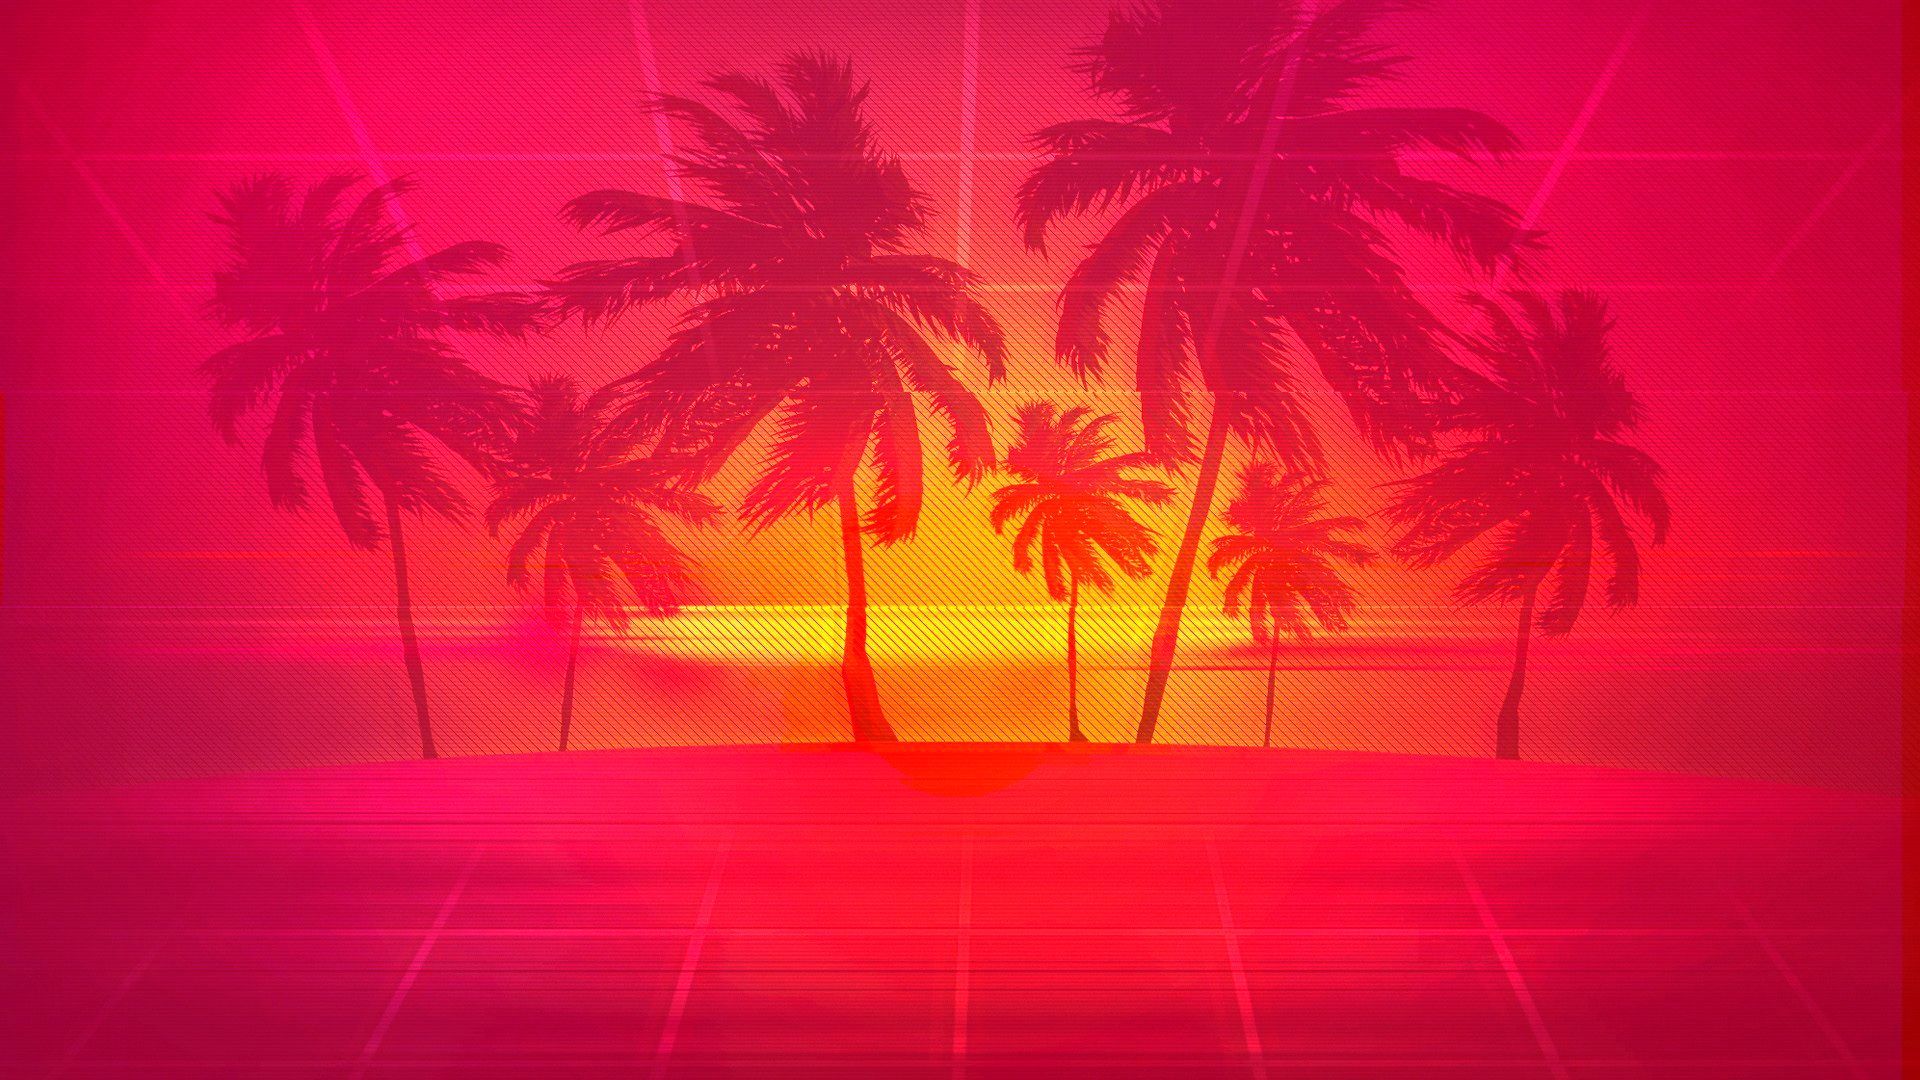 Retro Wave HD Wallpapers.